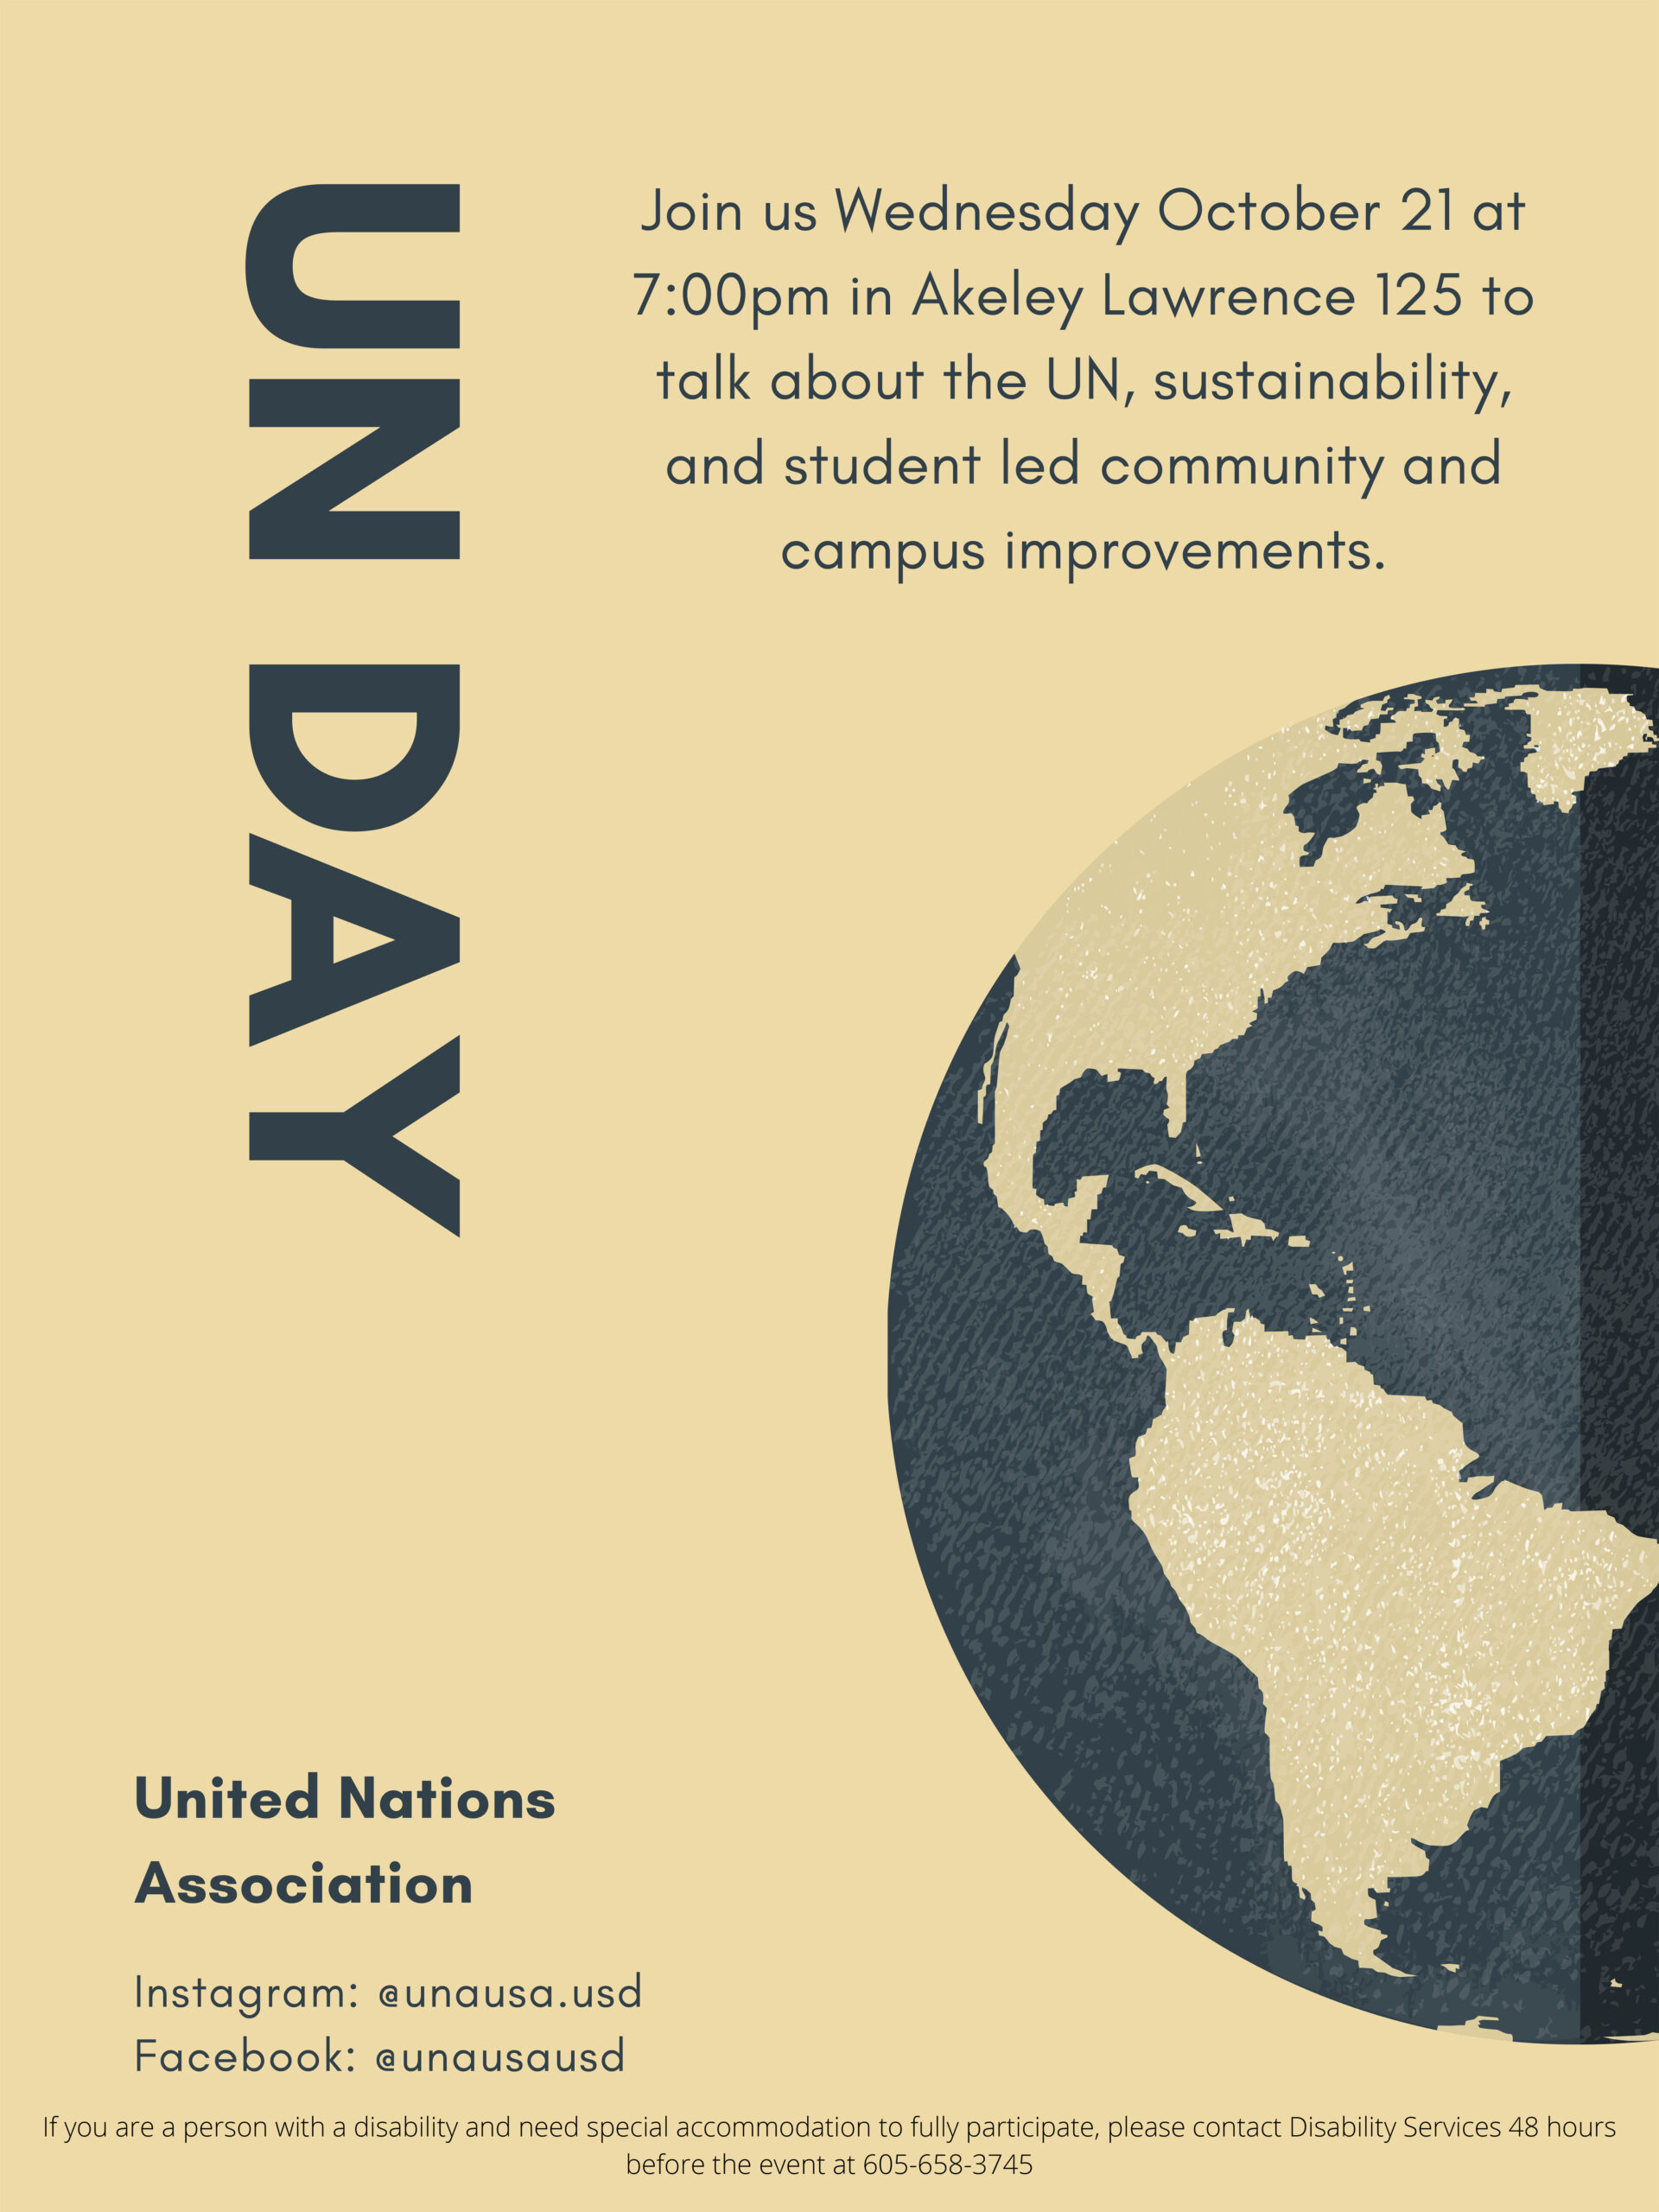 UNA hosts UN Day, aims for sustainability education